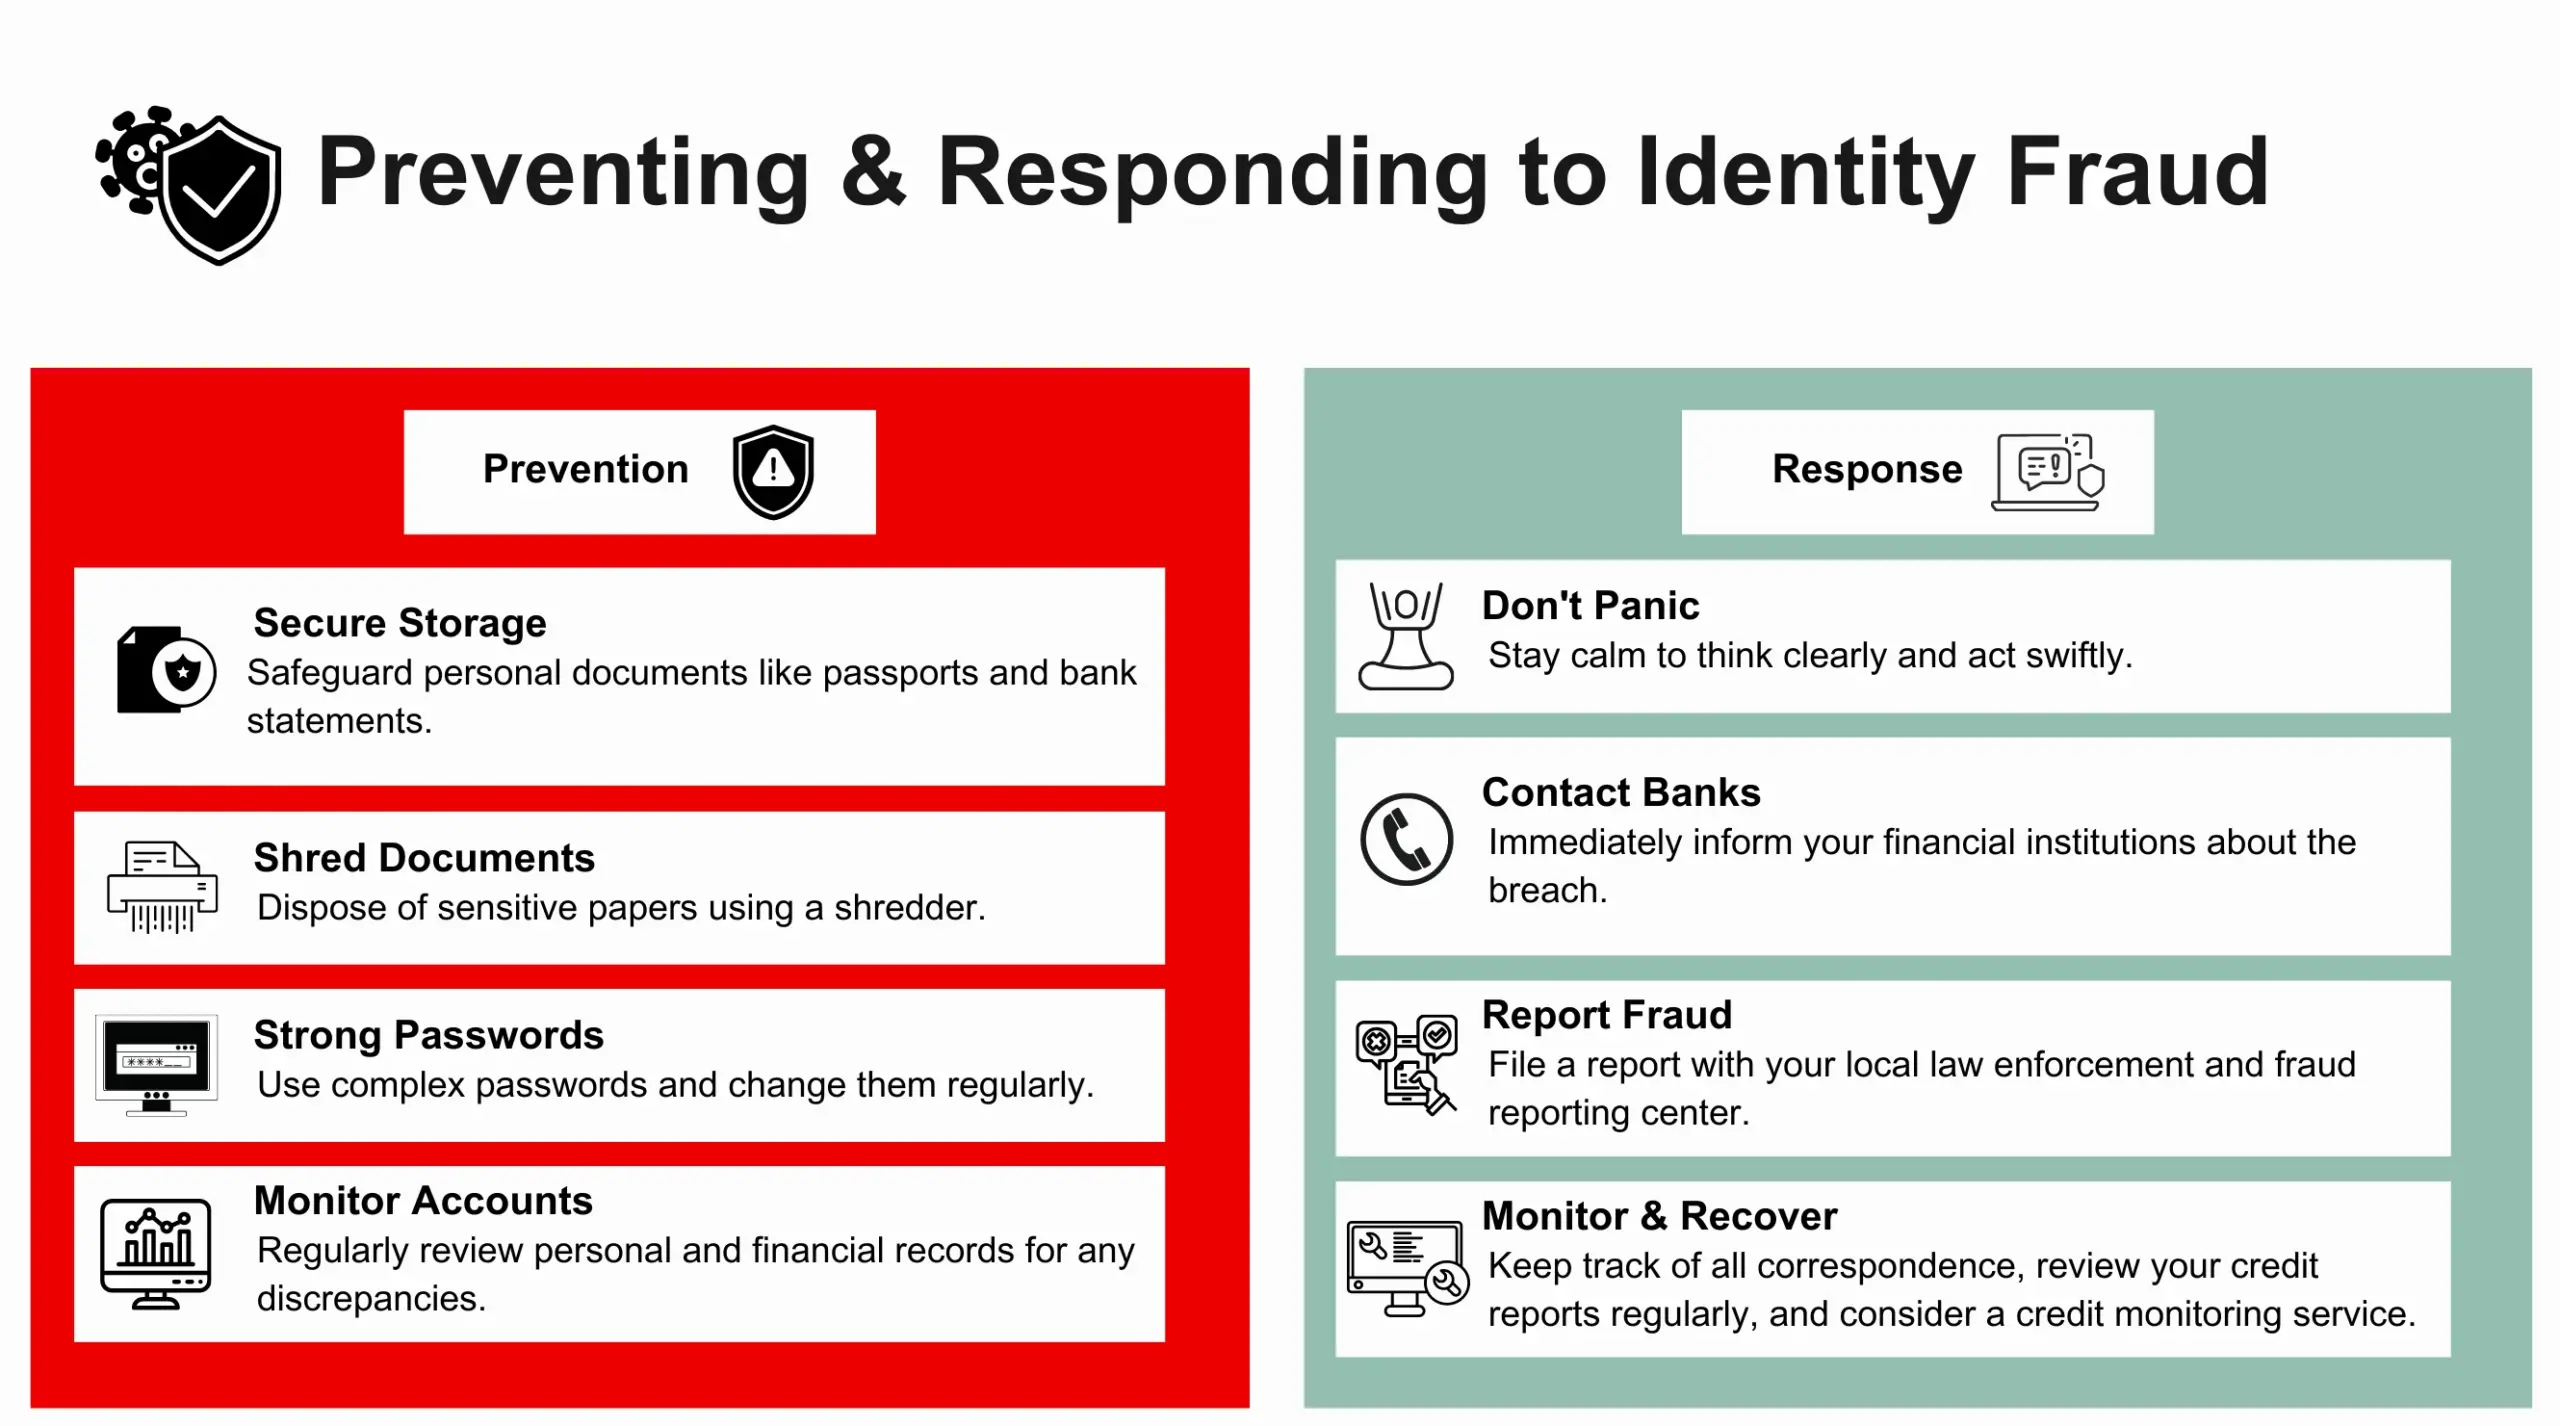 Preventing and Responding to Identity Fraud chart